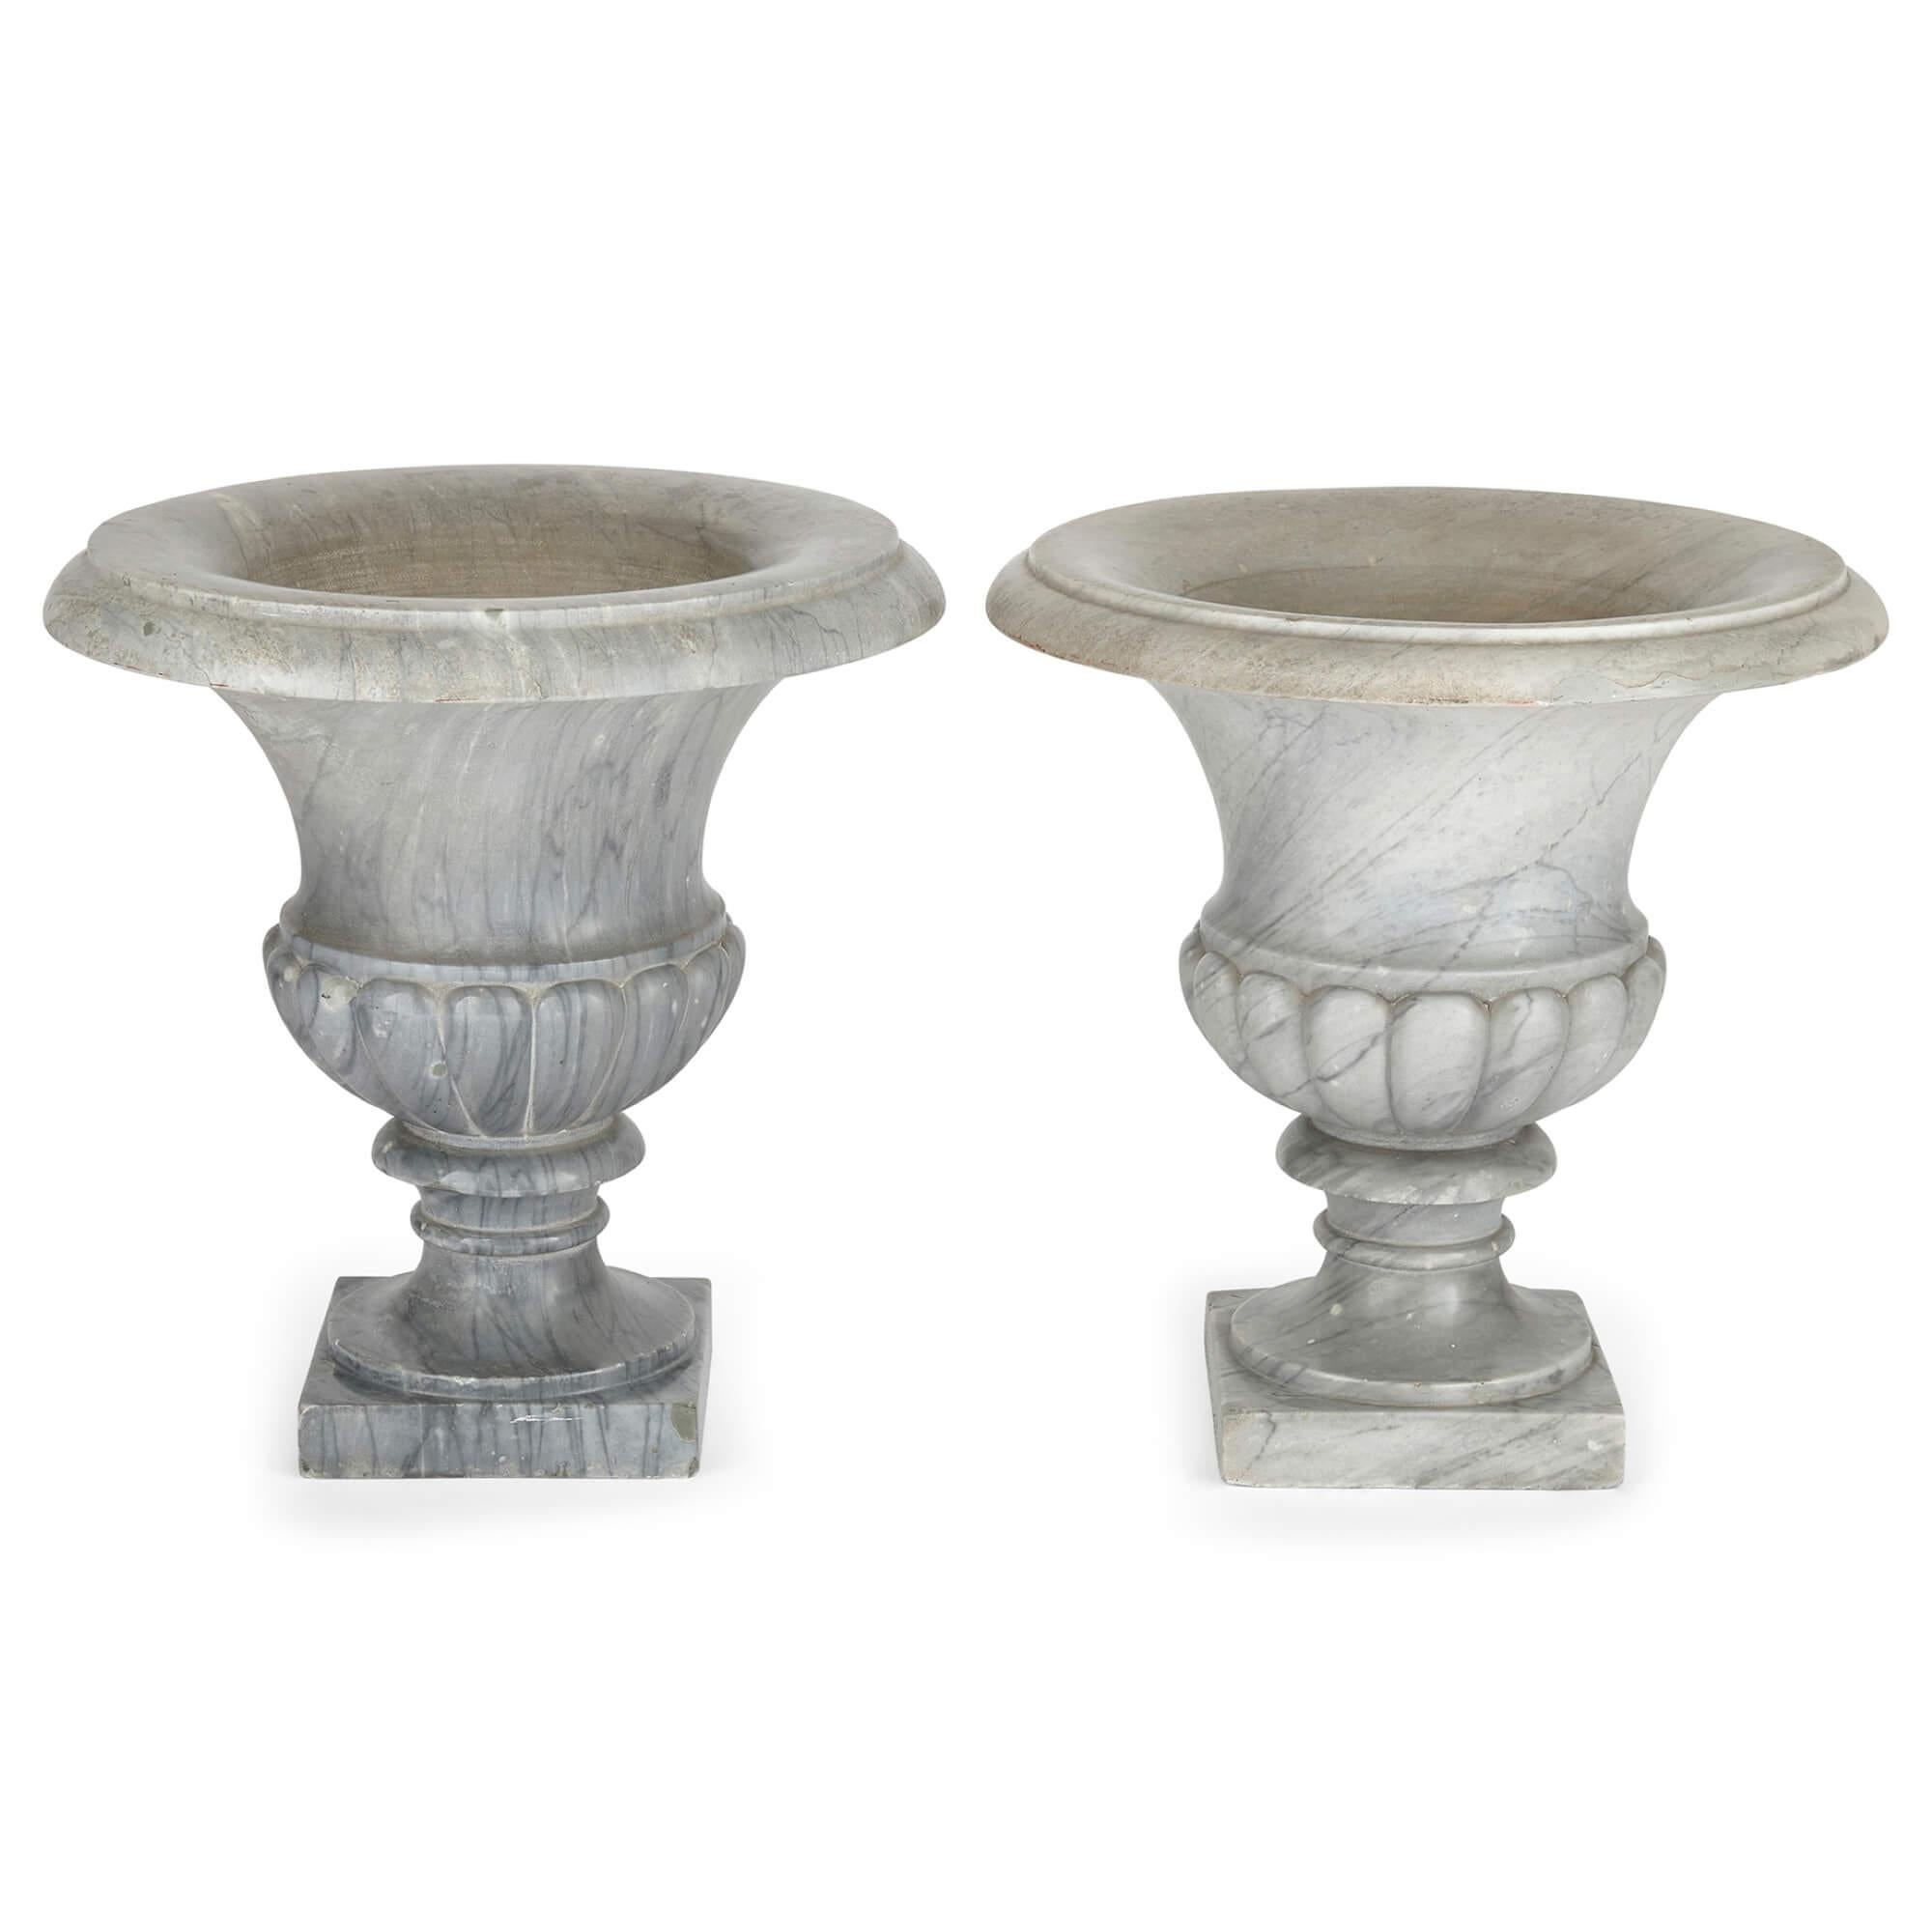 Pair of large grey marble Neoclassical Campana form garden vases
Continental, late 19th century
Measures: Height 46cm, diameter 44cm

These fantastic pieces are a pair of large neoclassical garden vases, carved from grey marble in the familiar